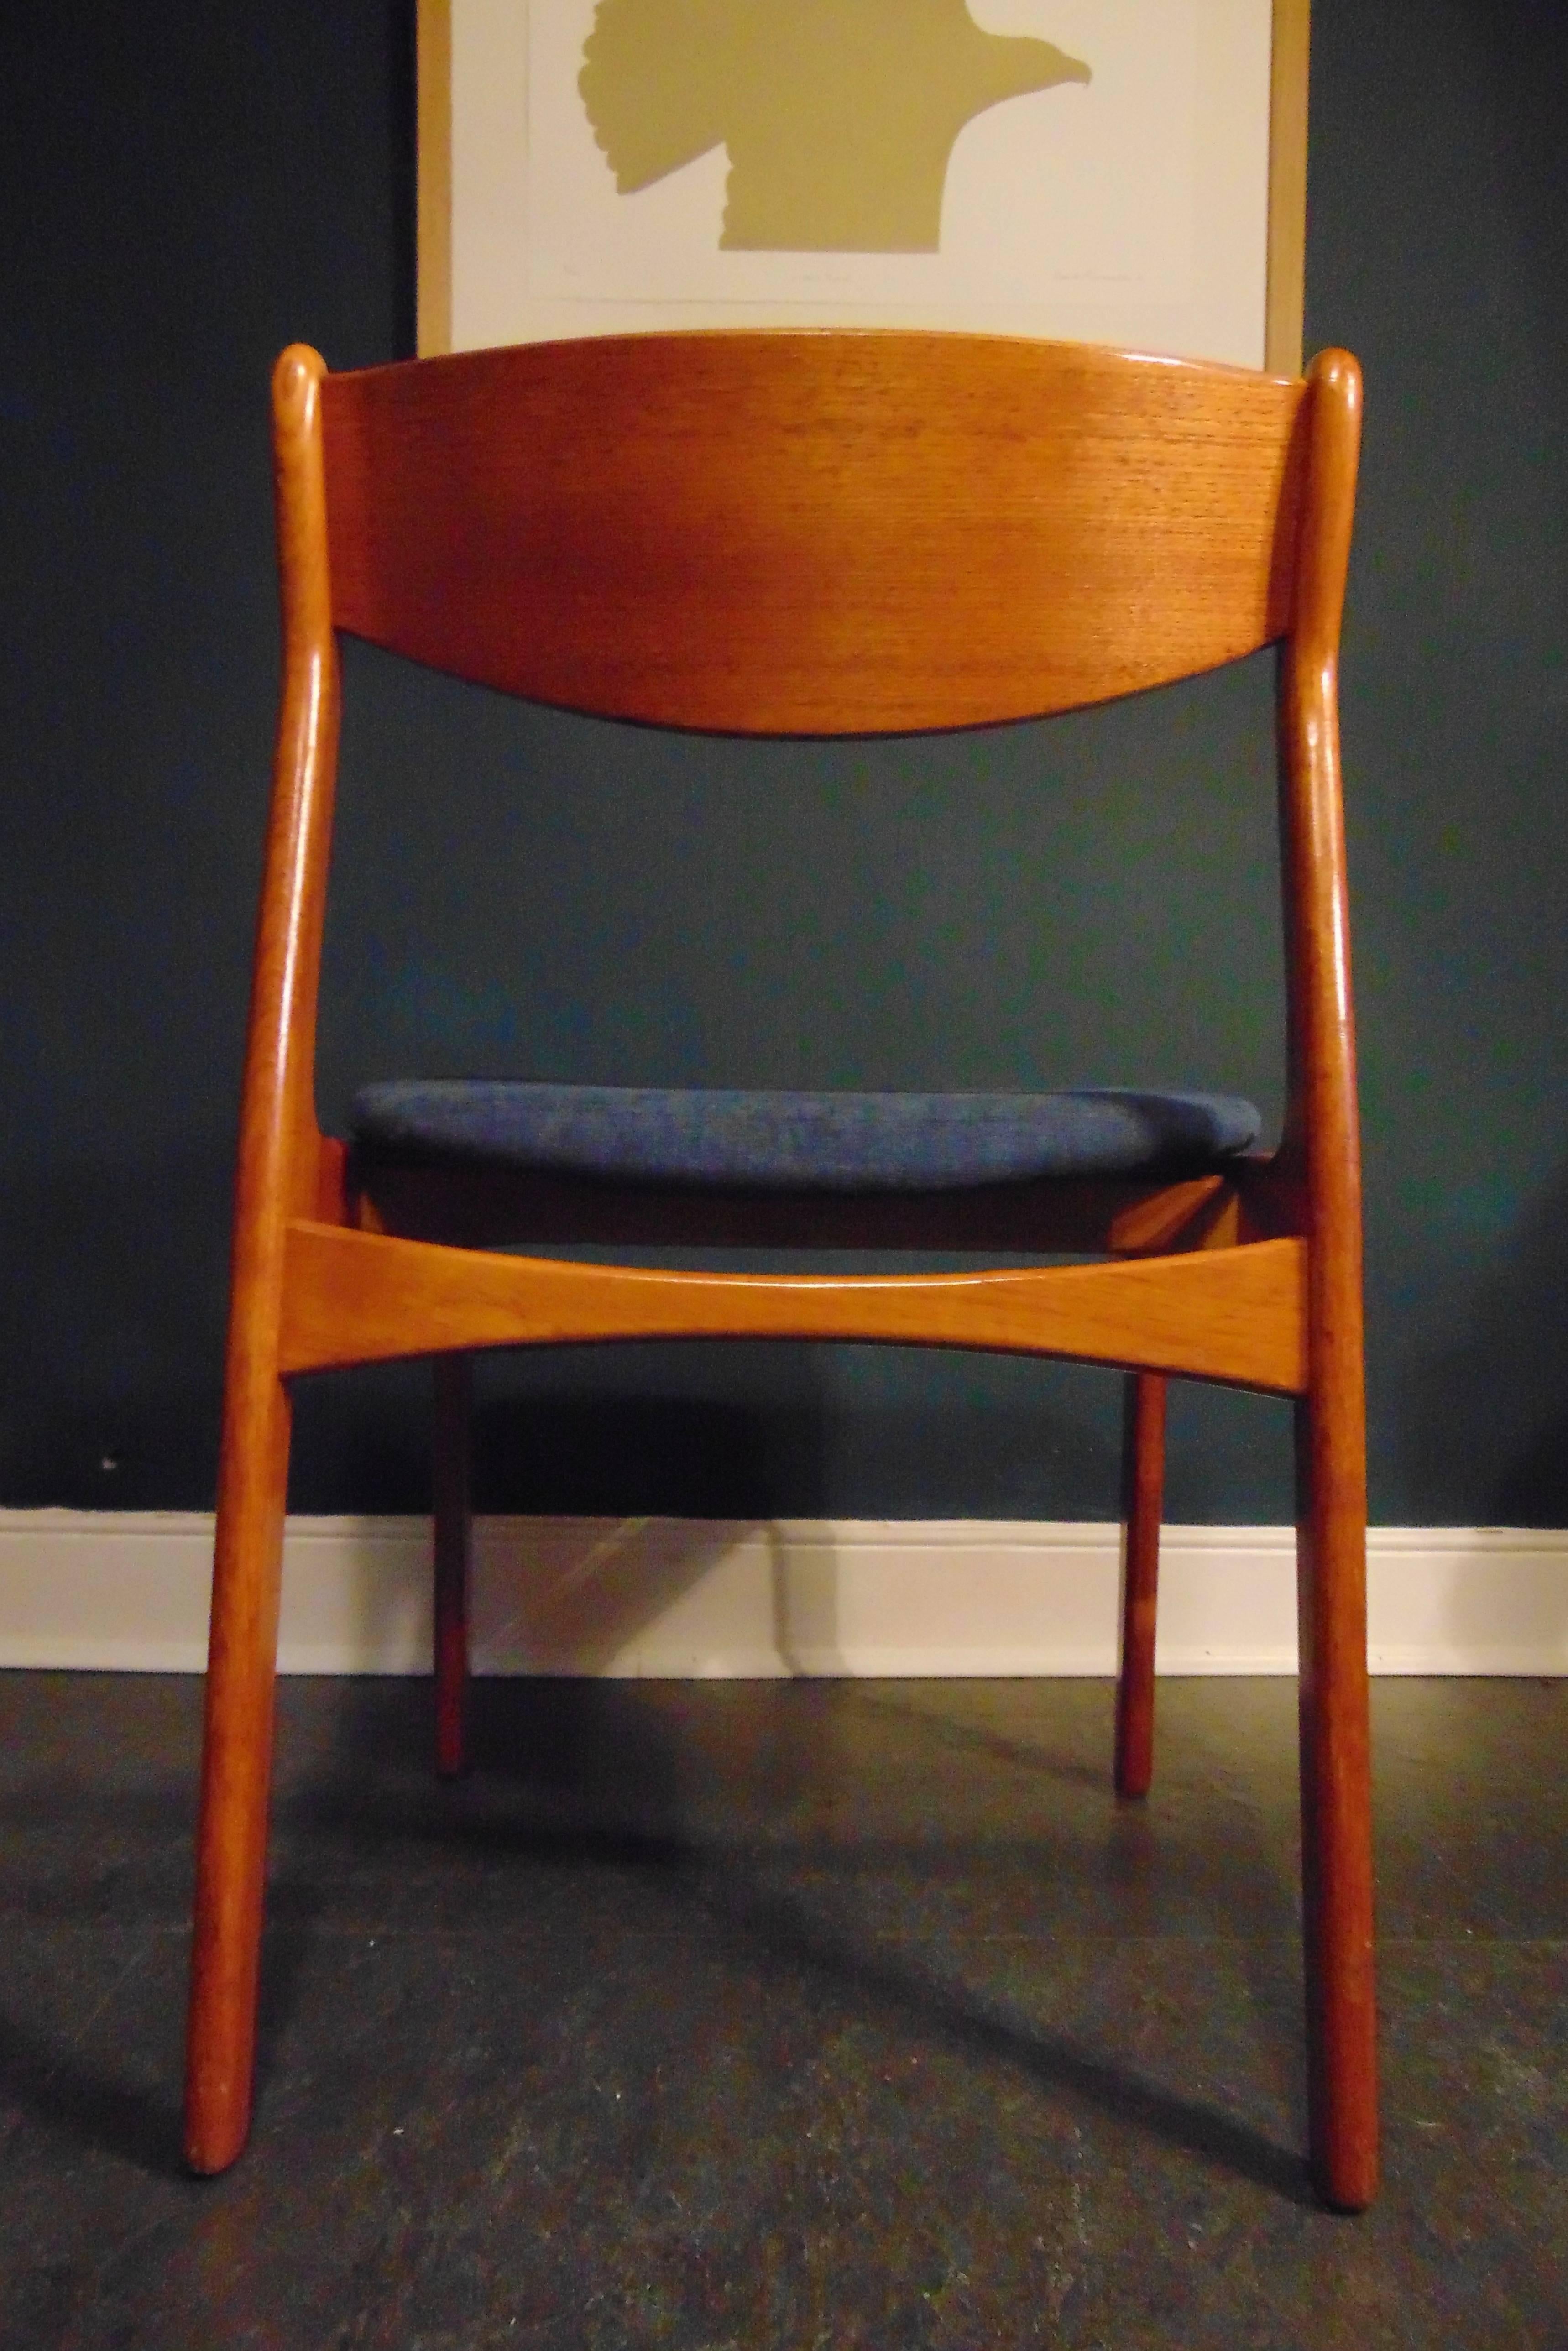 Midcentury Danish Teak Dining Chairs by P.E Jorgensen for Farso Stolefabrik In Excellent Condition For Sale In Ambleside, Cumbria